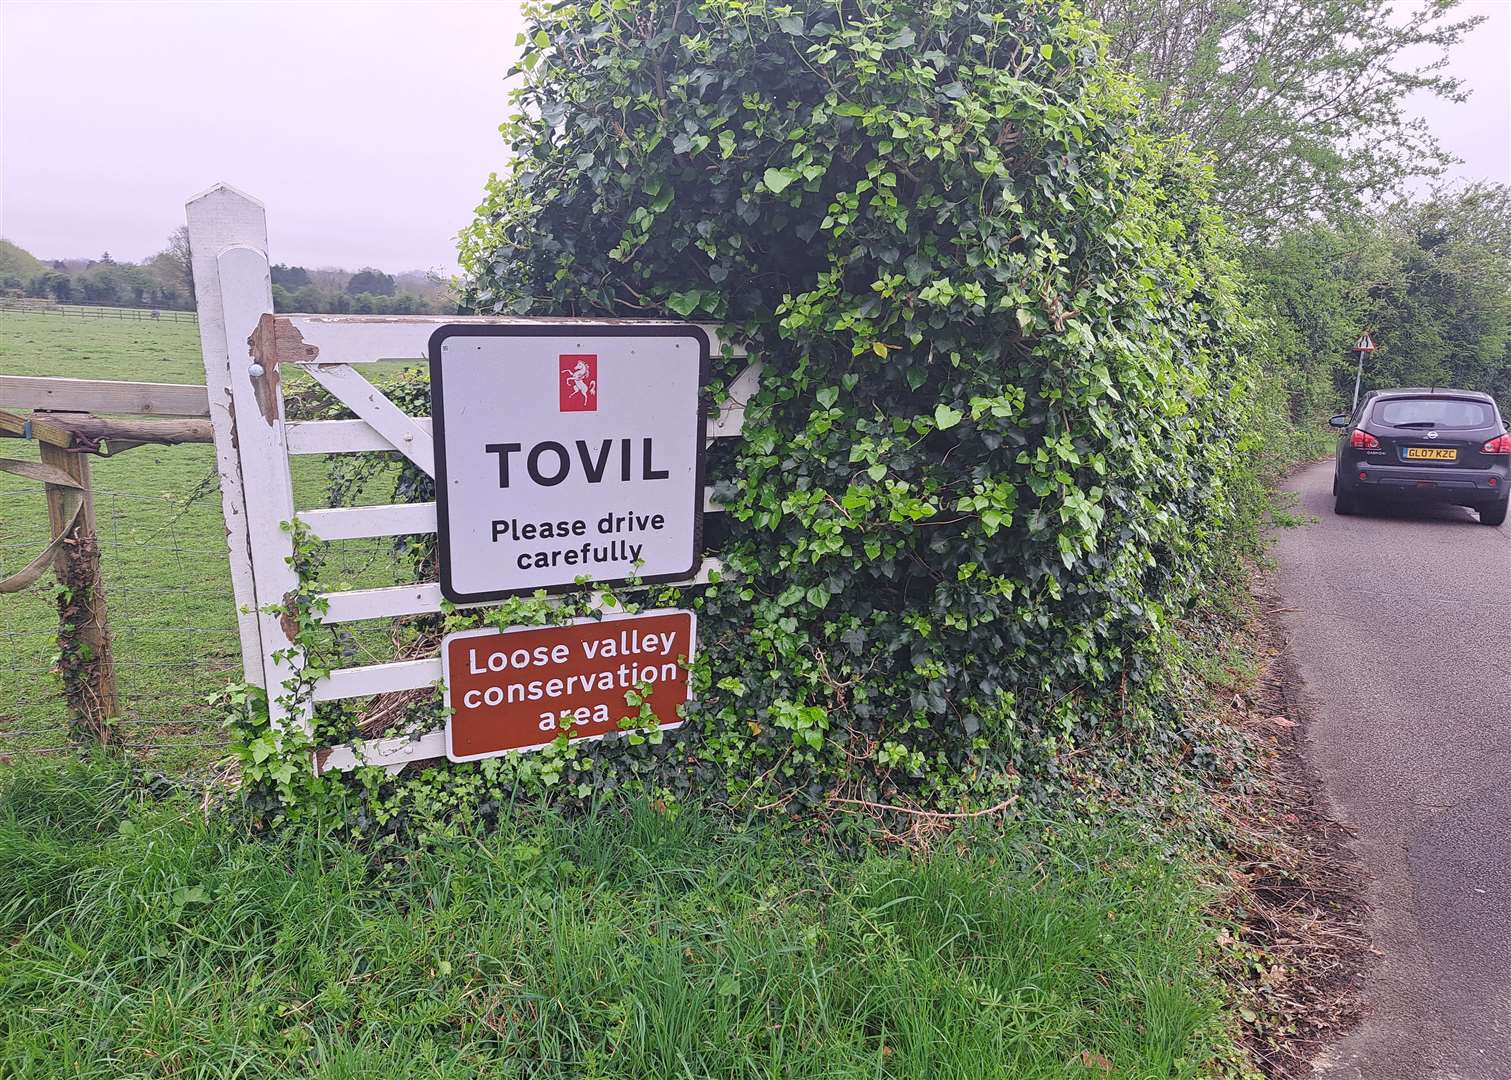 Saxon Way is below the roadside sign marking entry to Tovil, but it seems is now in Loose